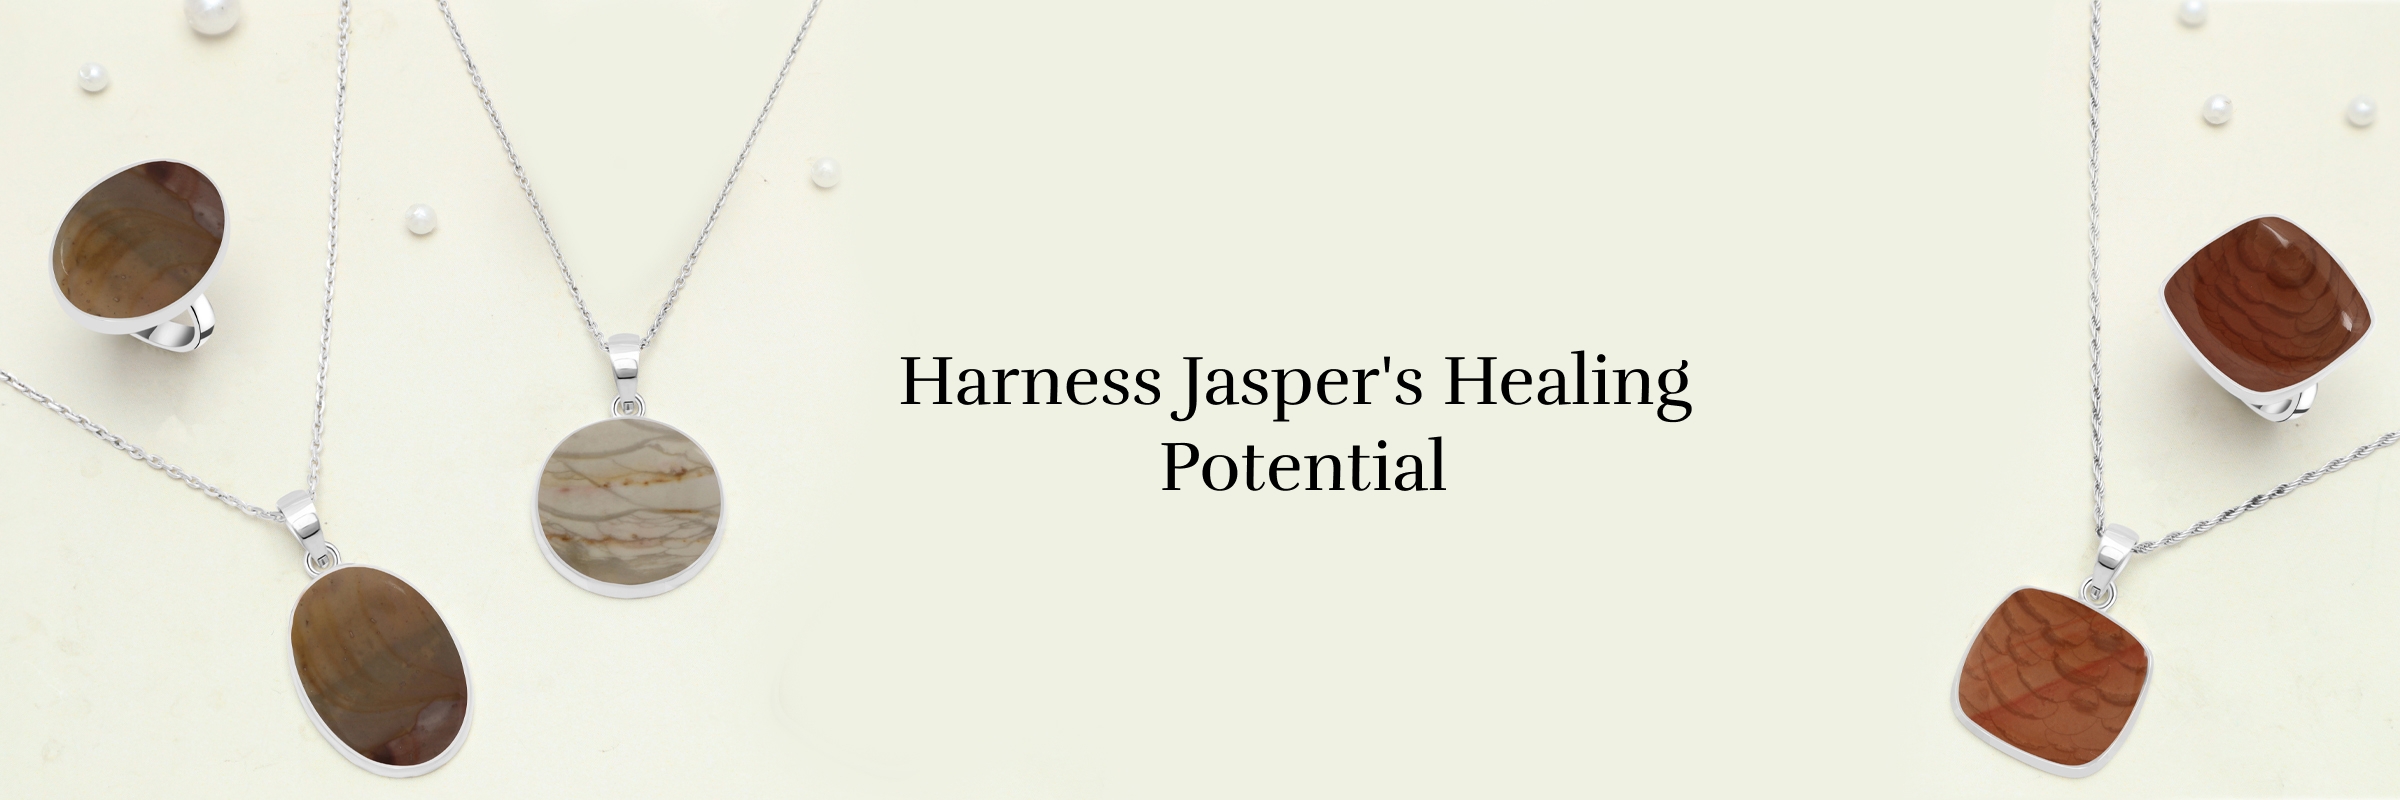 To use Willow Creek Jasper for potential healing purposes, you can try the following methods